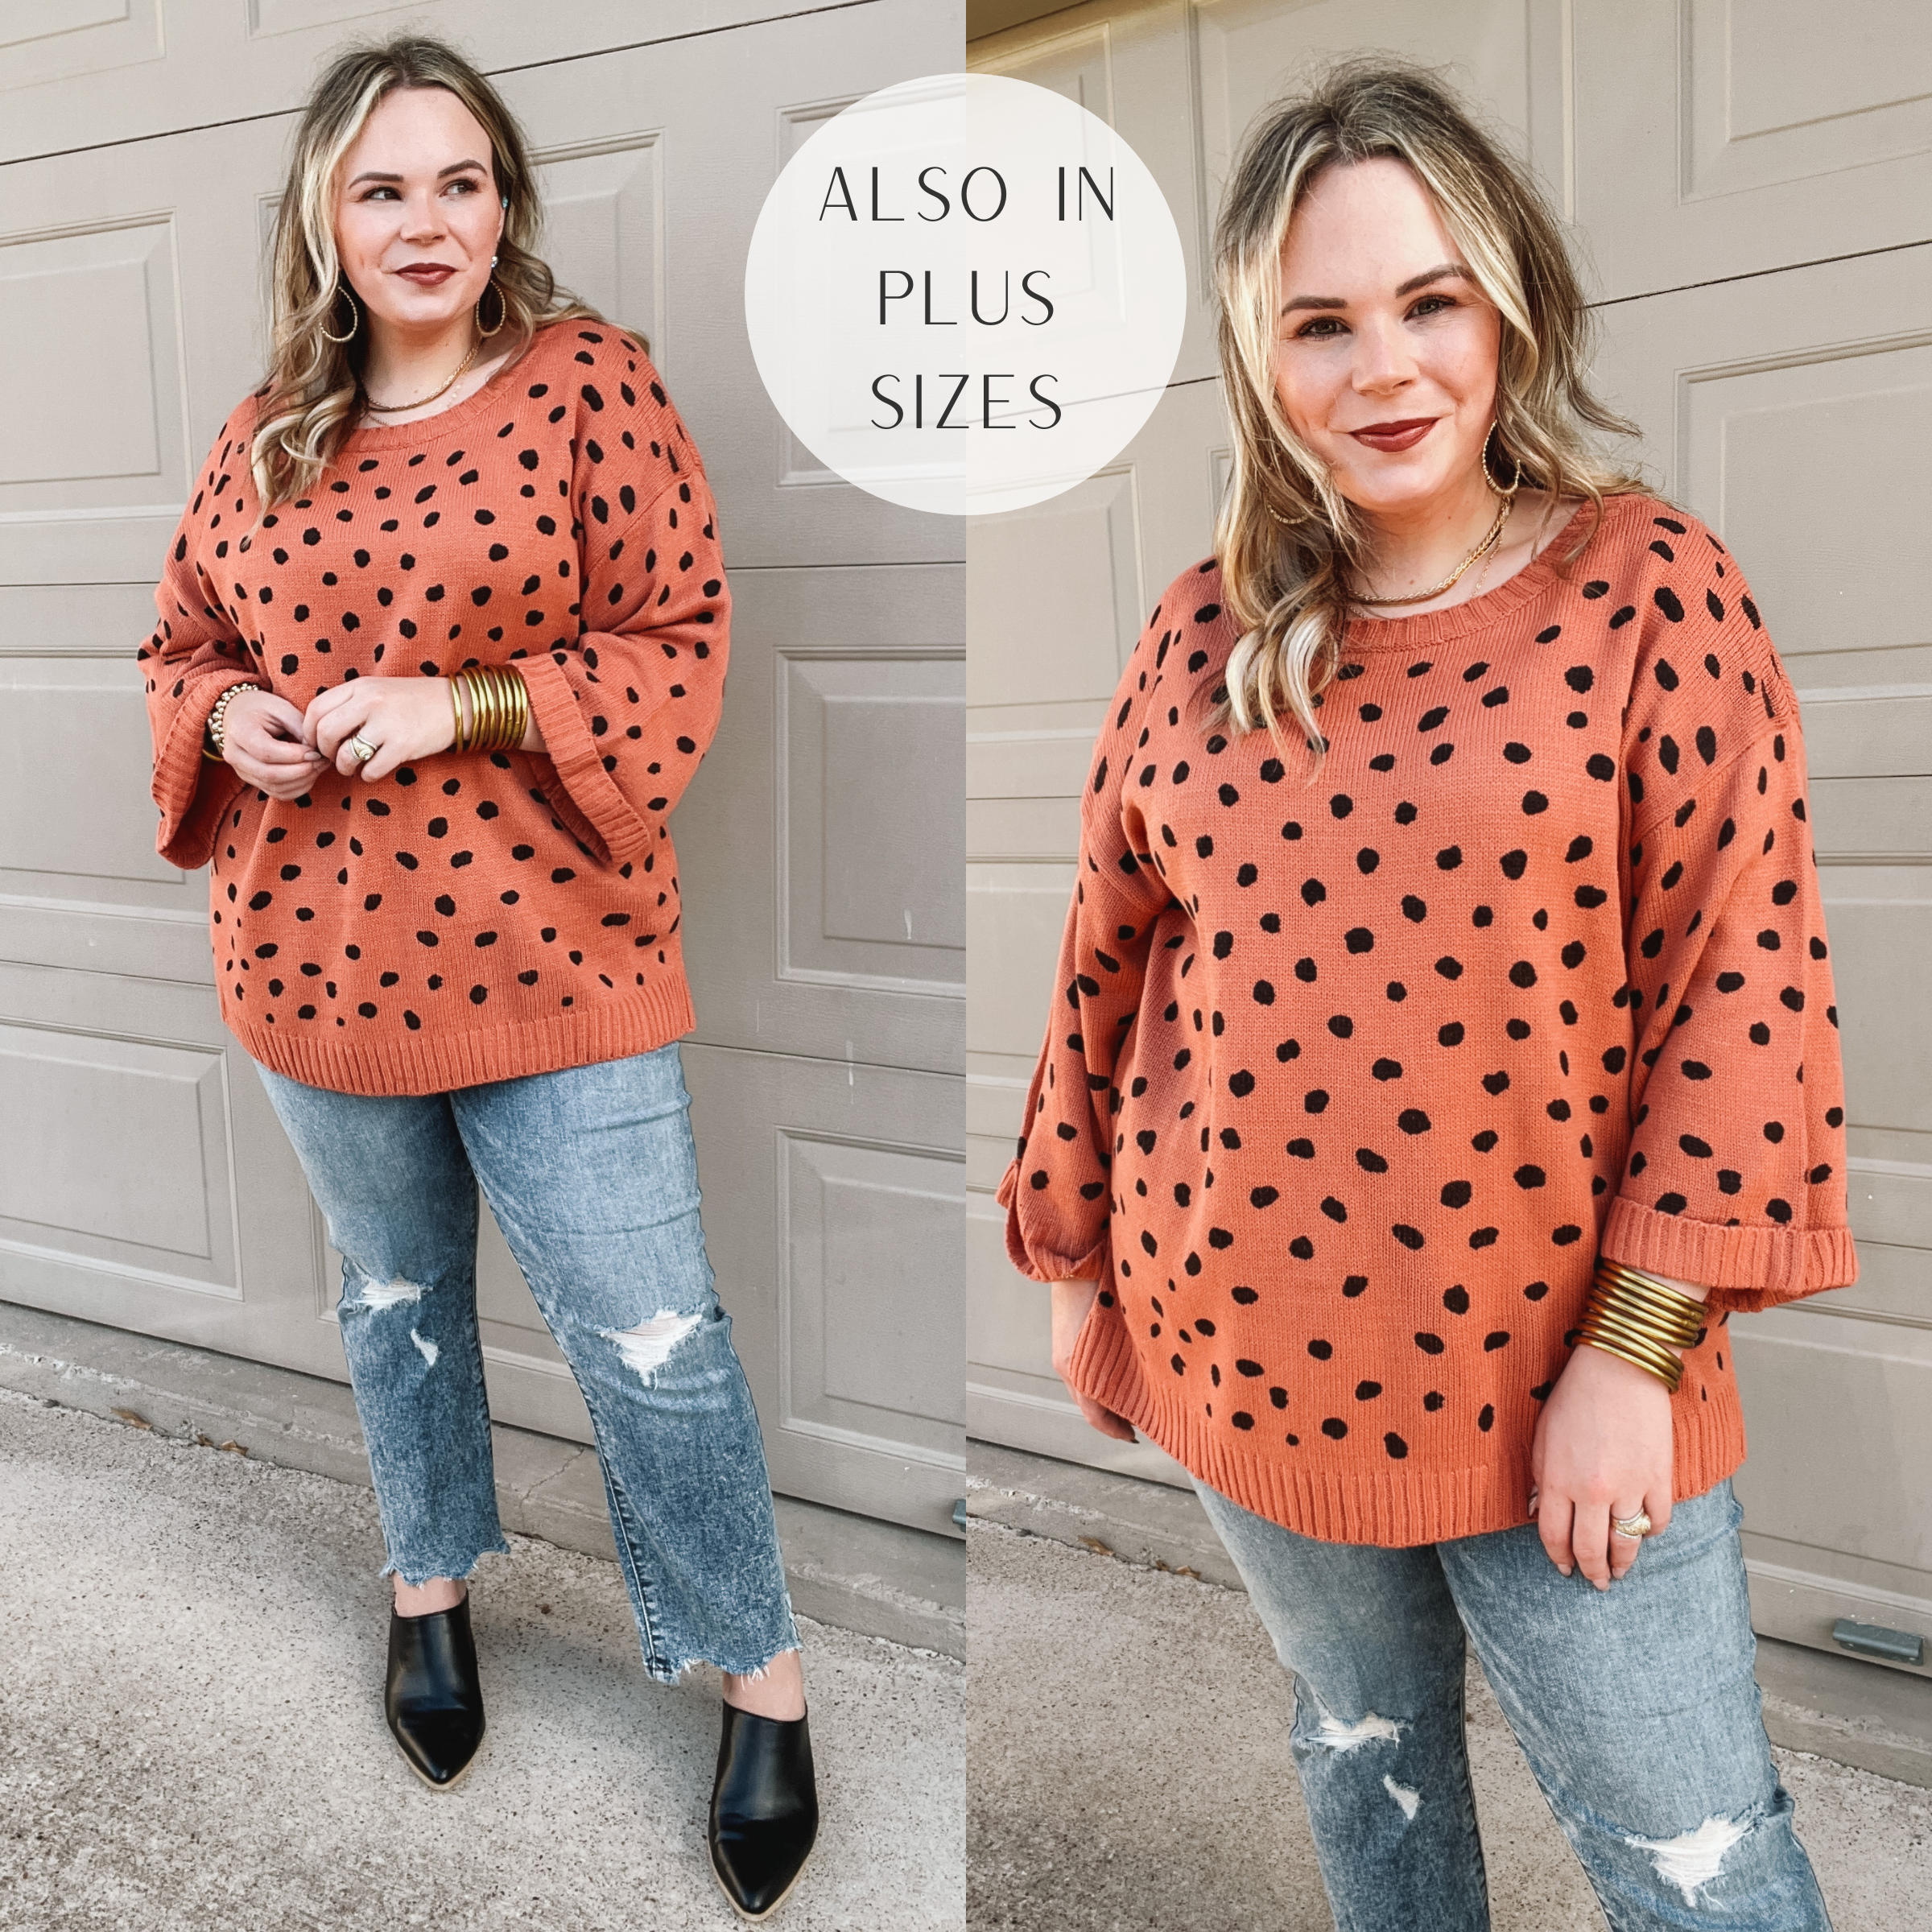 Iced Latte Love Wide 3/4 Sleeve Polka Dot Sweater in Clay Orange - Giddy Up Glamour Boutique